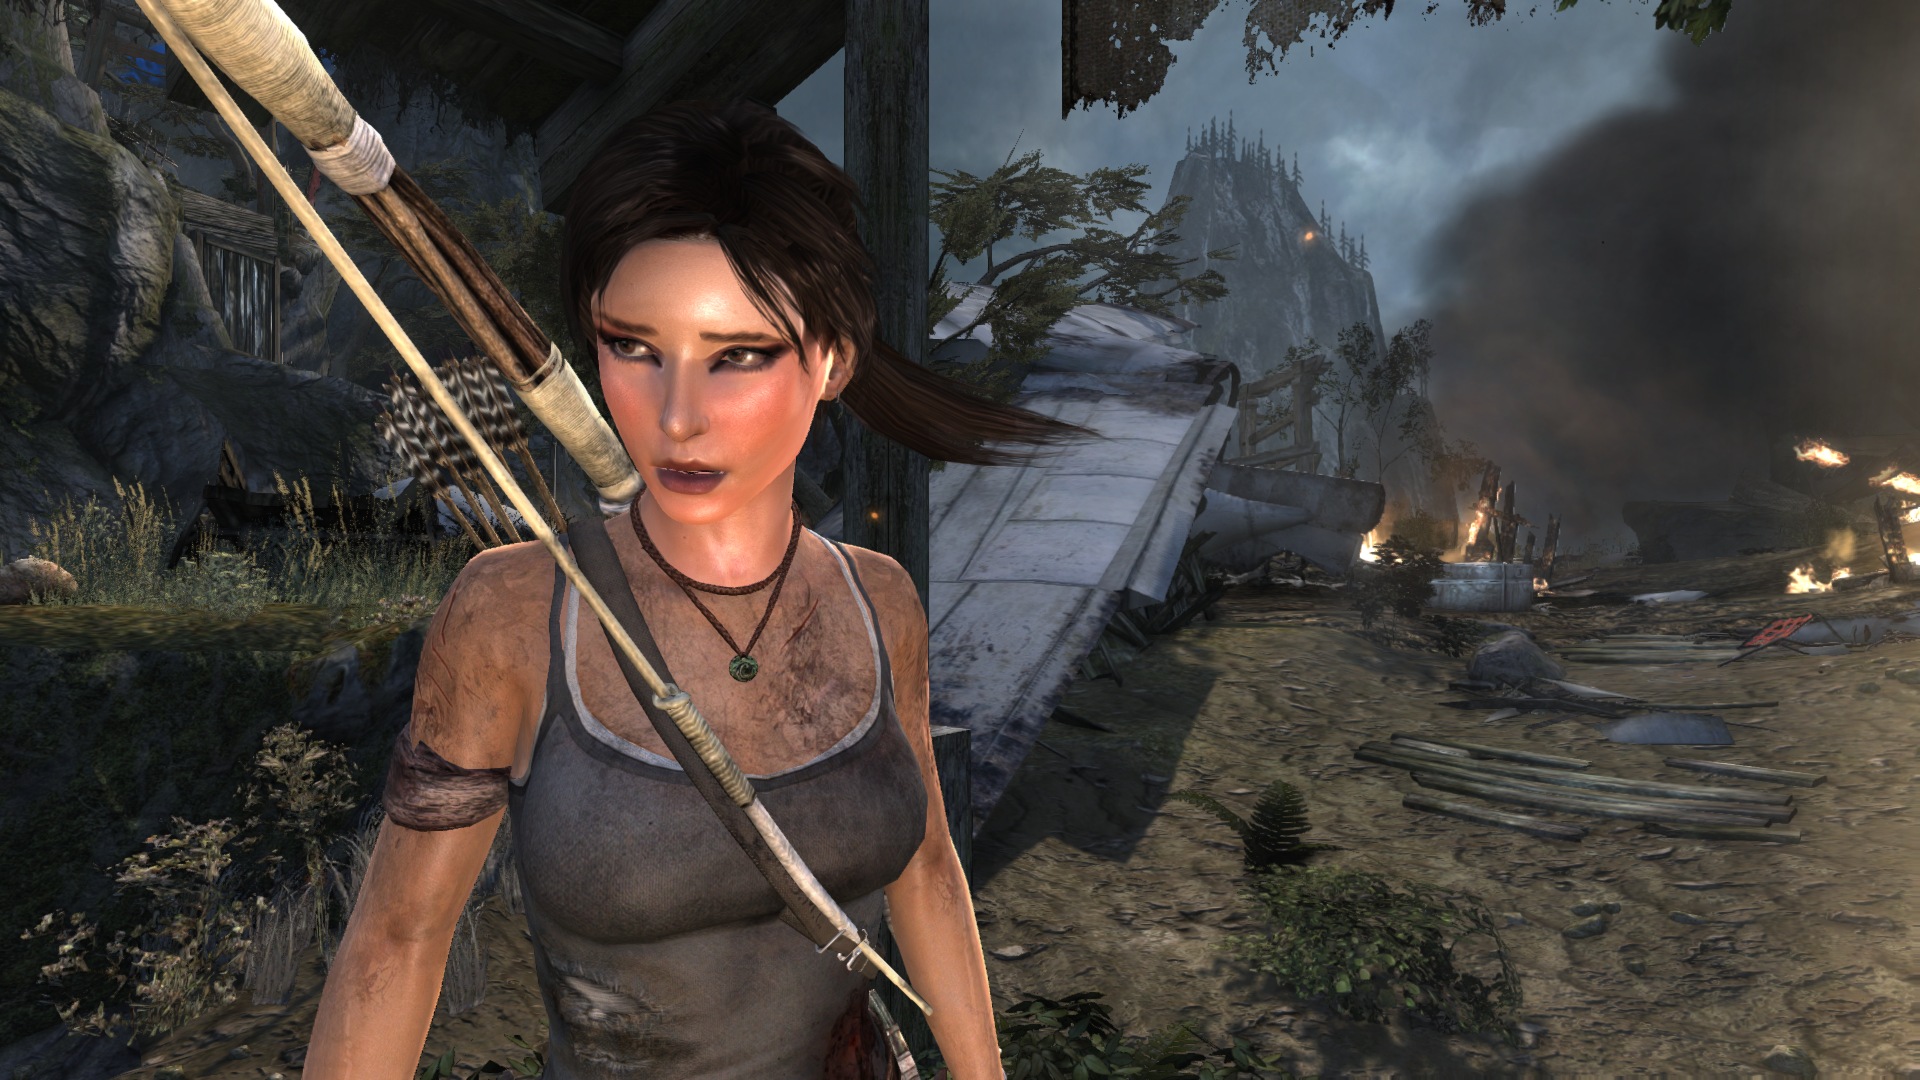 becky johnson auger recommends Tomb Raider Mods 2013